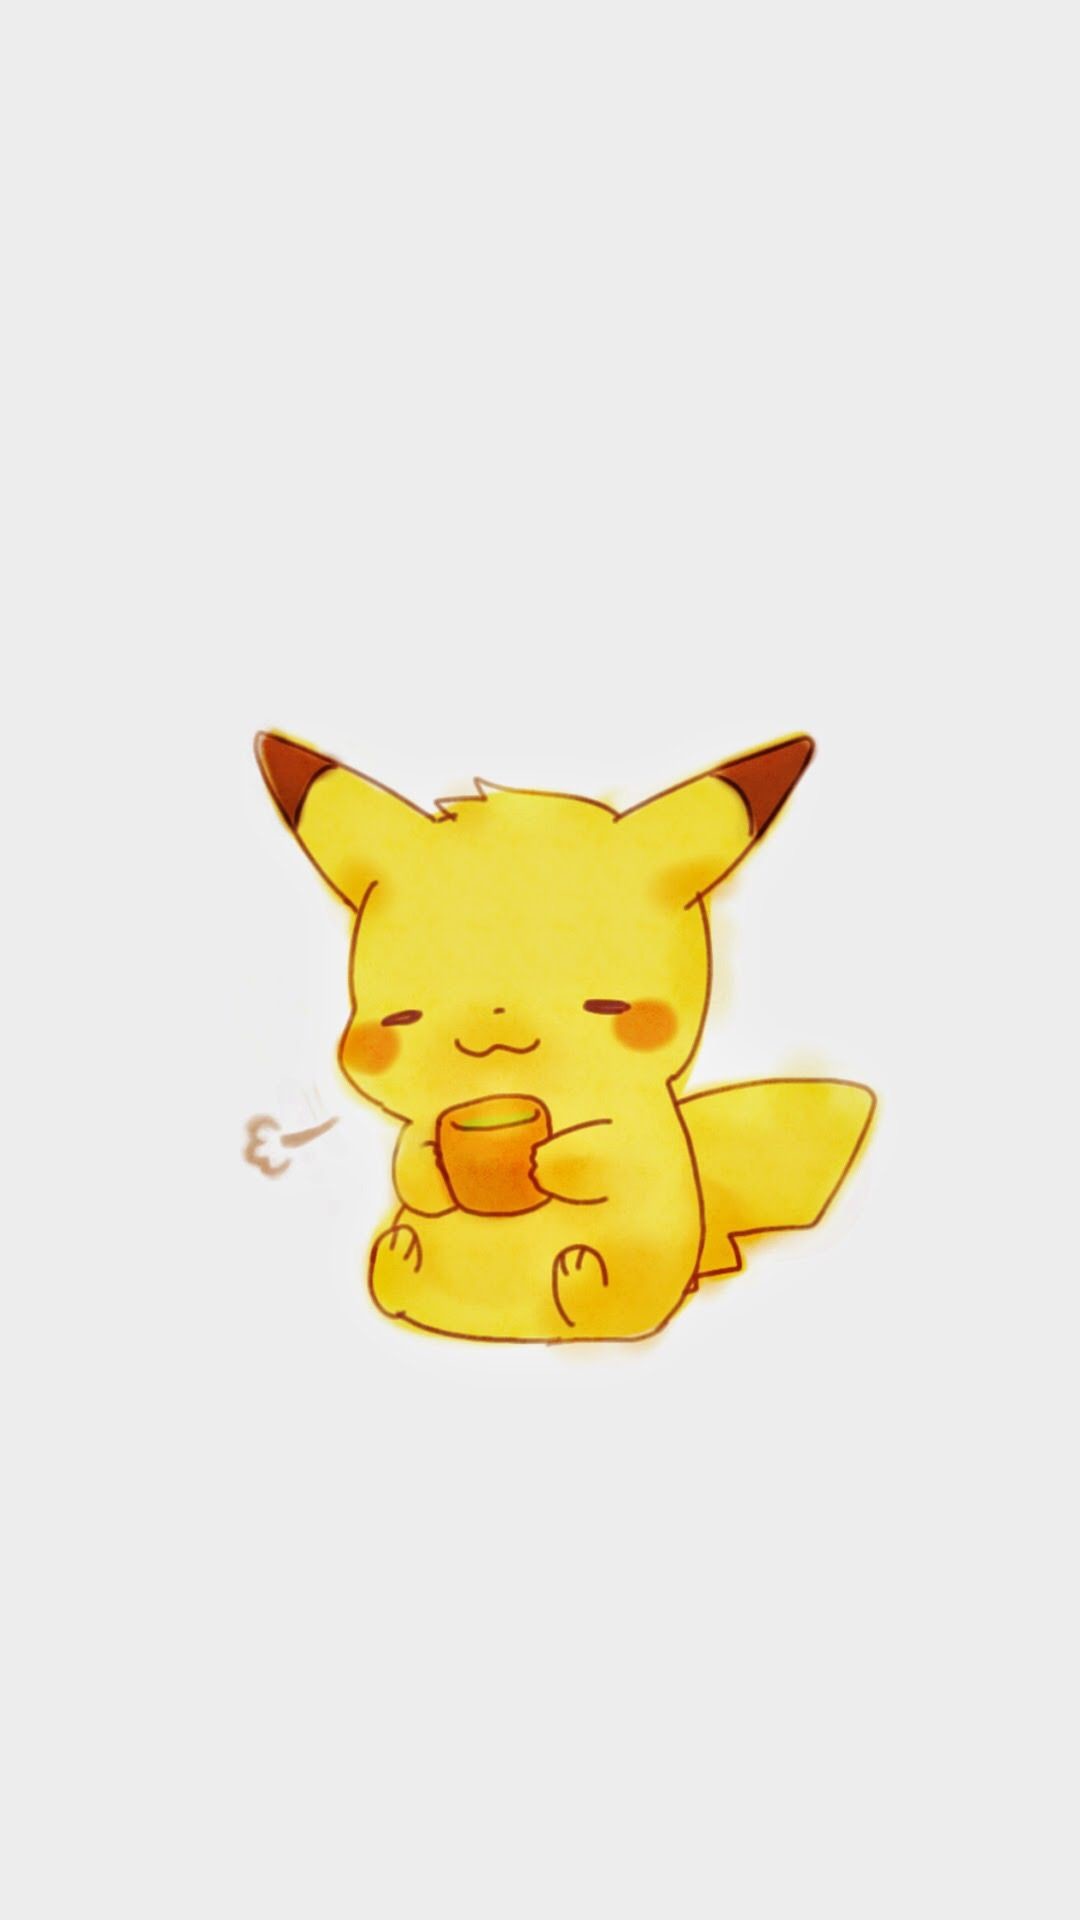 1080x1920 Tap image for more funny cute Pikachu wallpaper! Pikachu - @mobile9 |  Wallpapers for iPhone 5/5s/5c, iPhone 6 & 6 plus #pokemon #anime